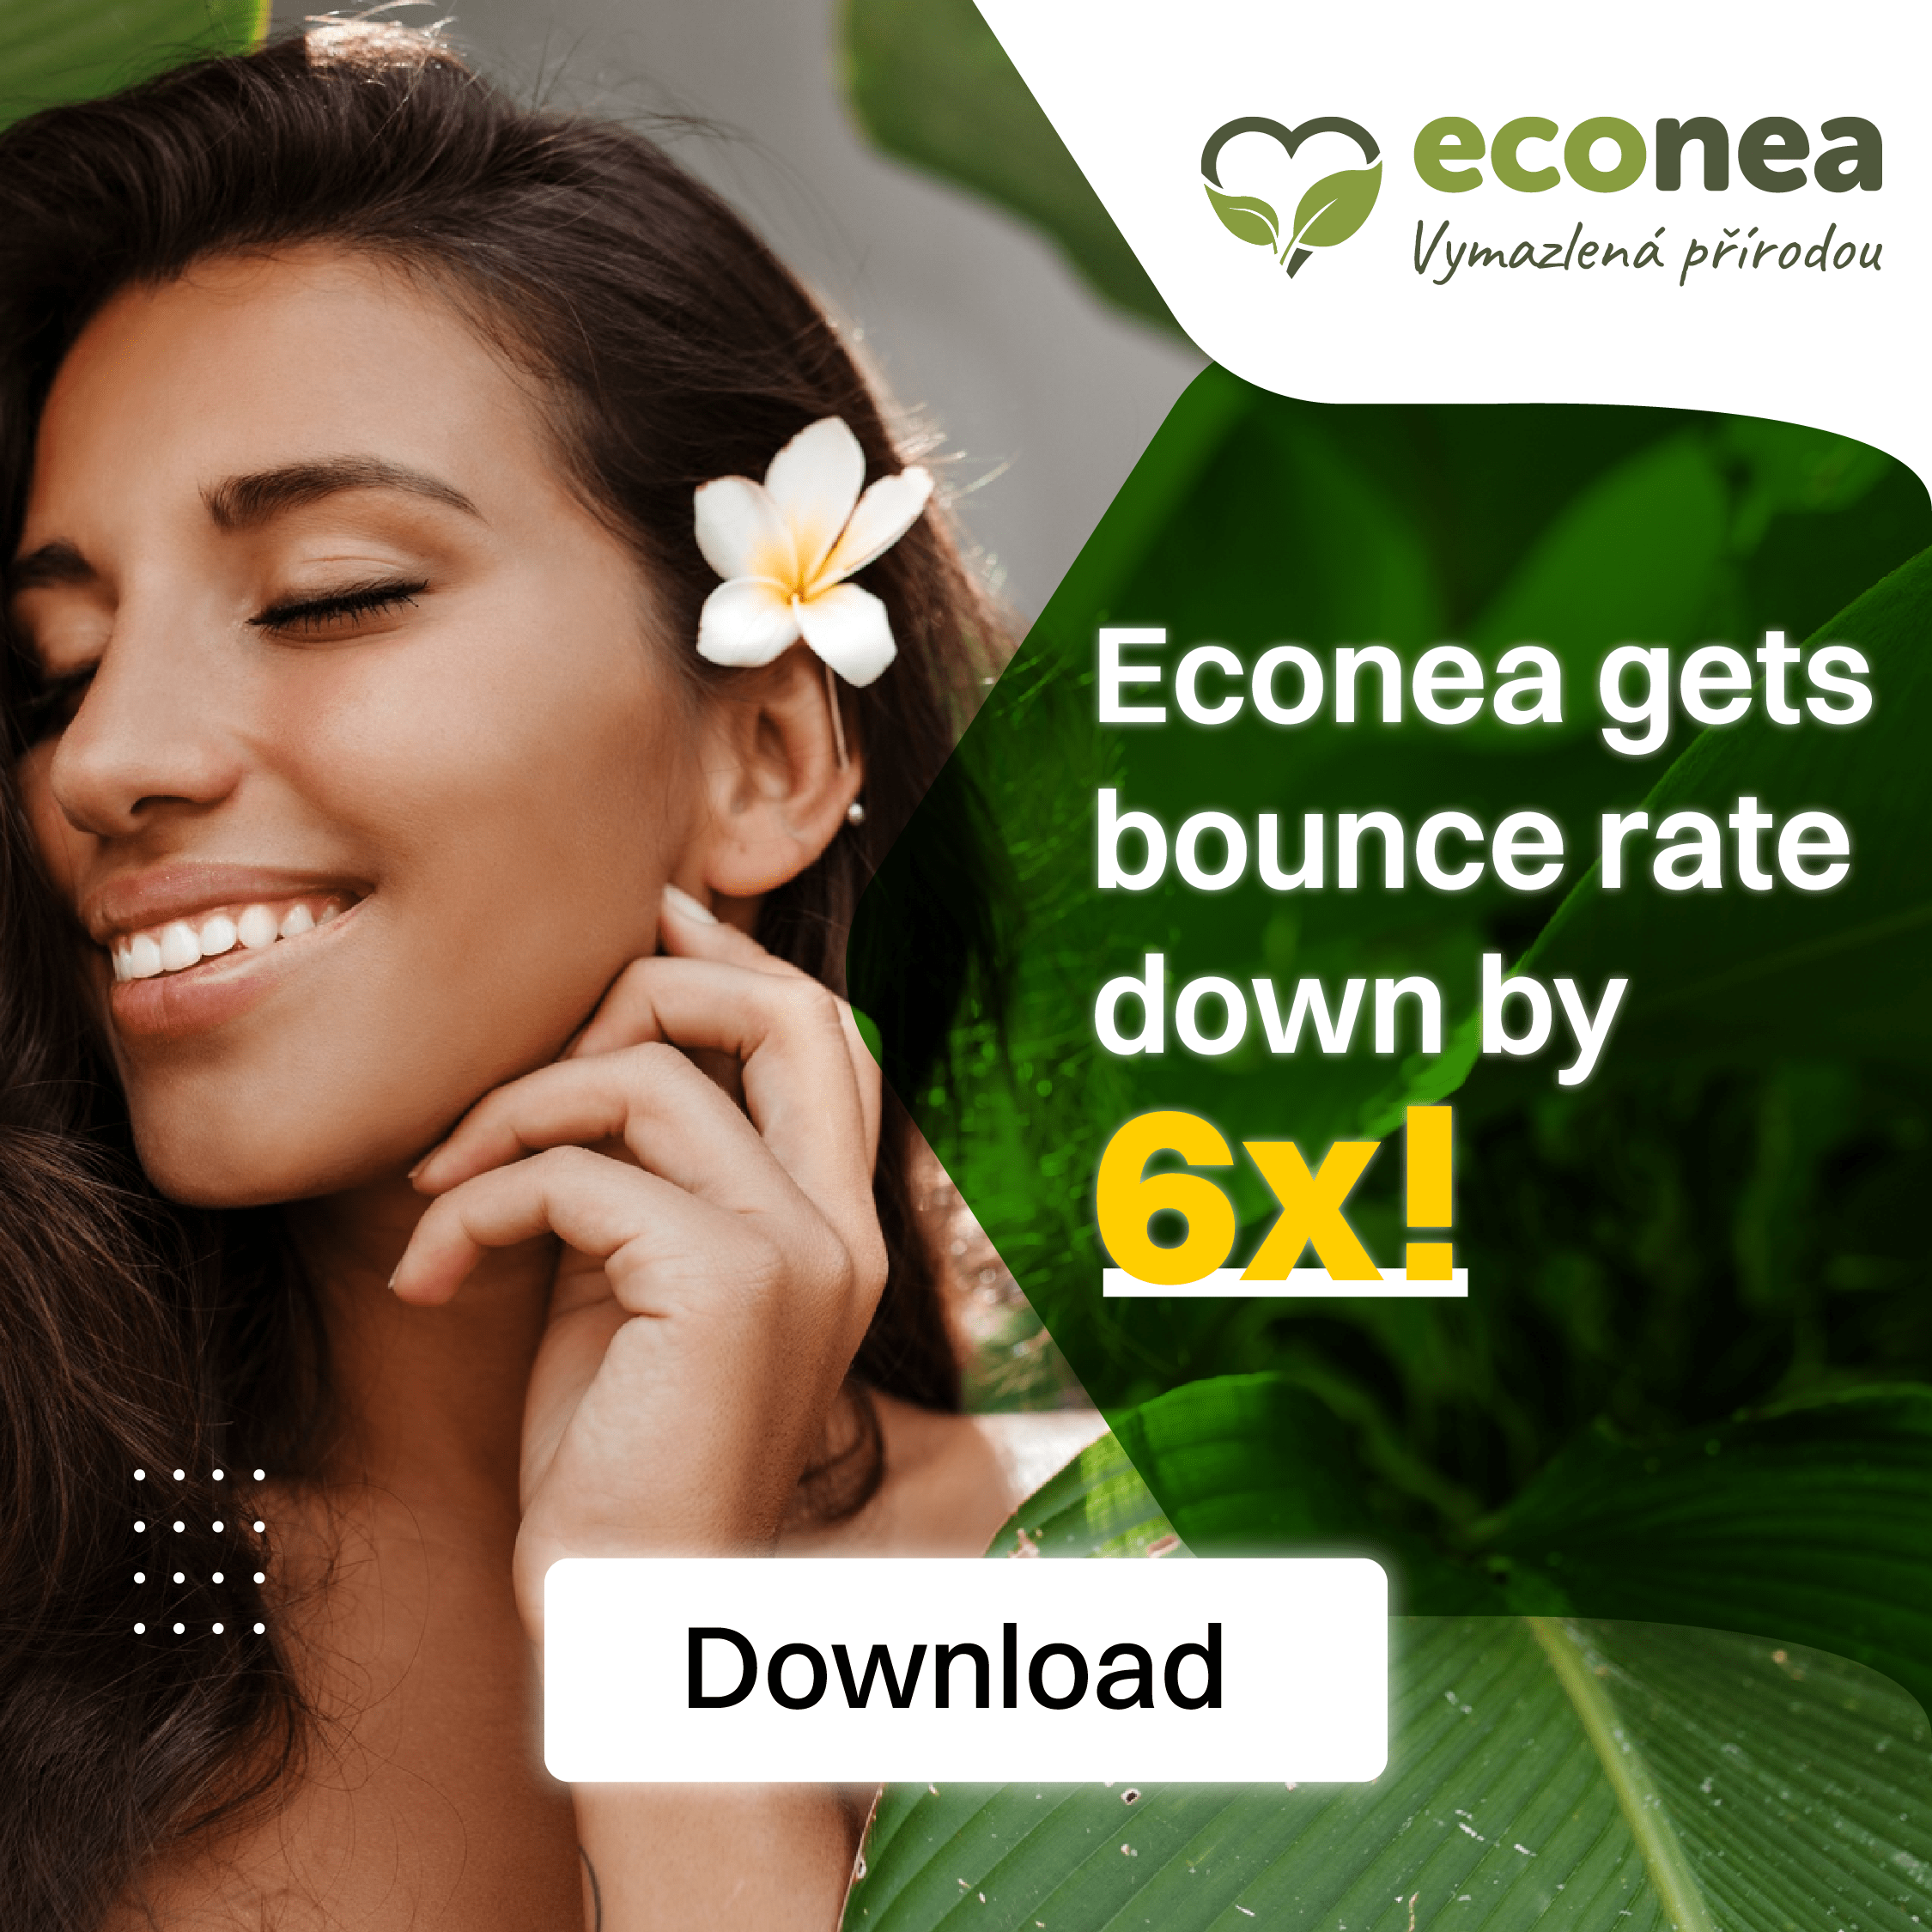 Download the Econea success story to learn how they got their bounce rate to drop by 6x!